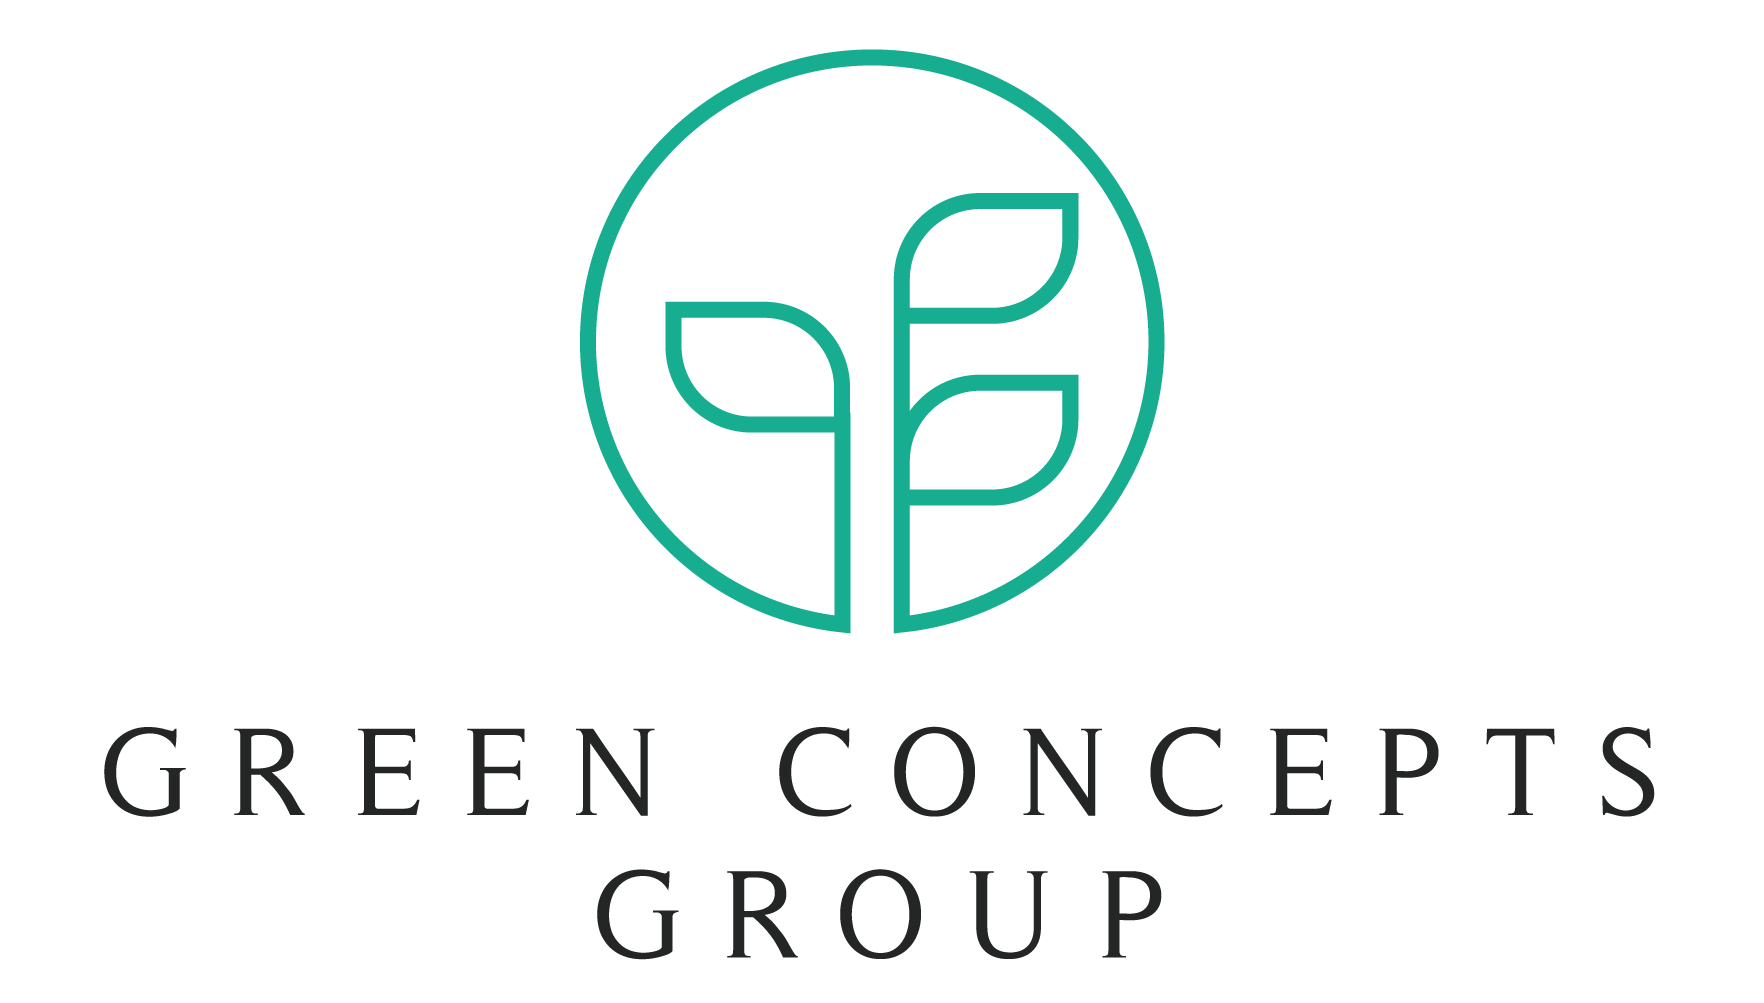 Green Concepts Group